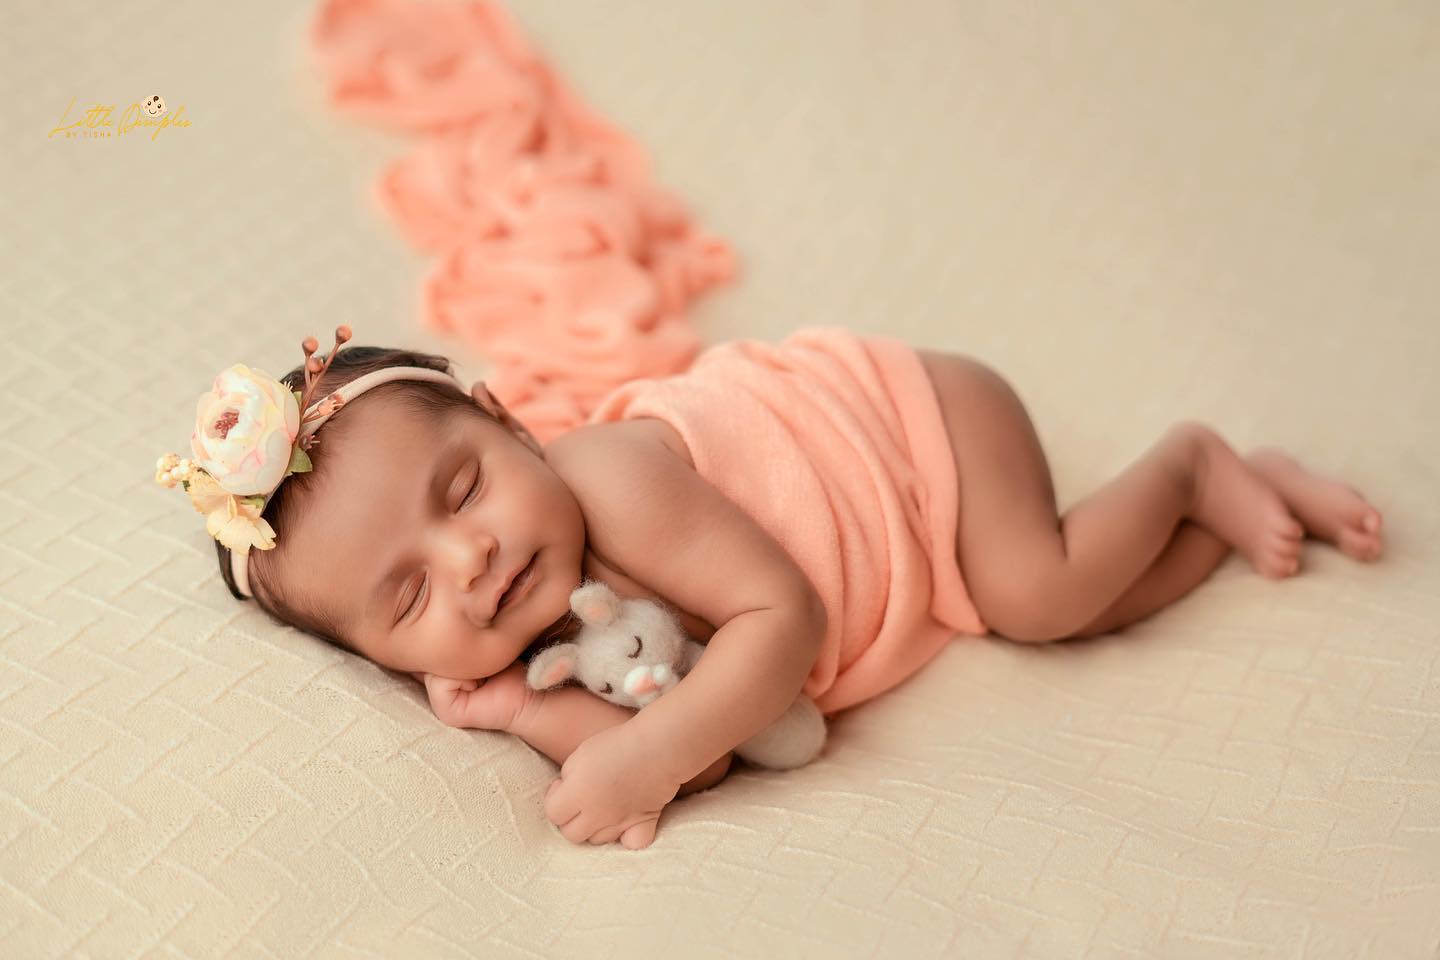 We specialize in elegant newborn photography and baby photography. If you are looking for Baby Photoshoot Bangalore or newborn photoshoot in Bangalore, contact us now!